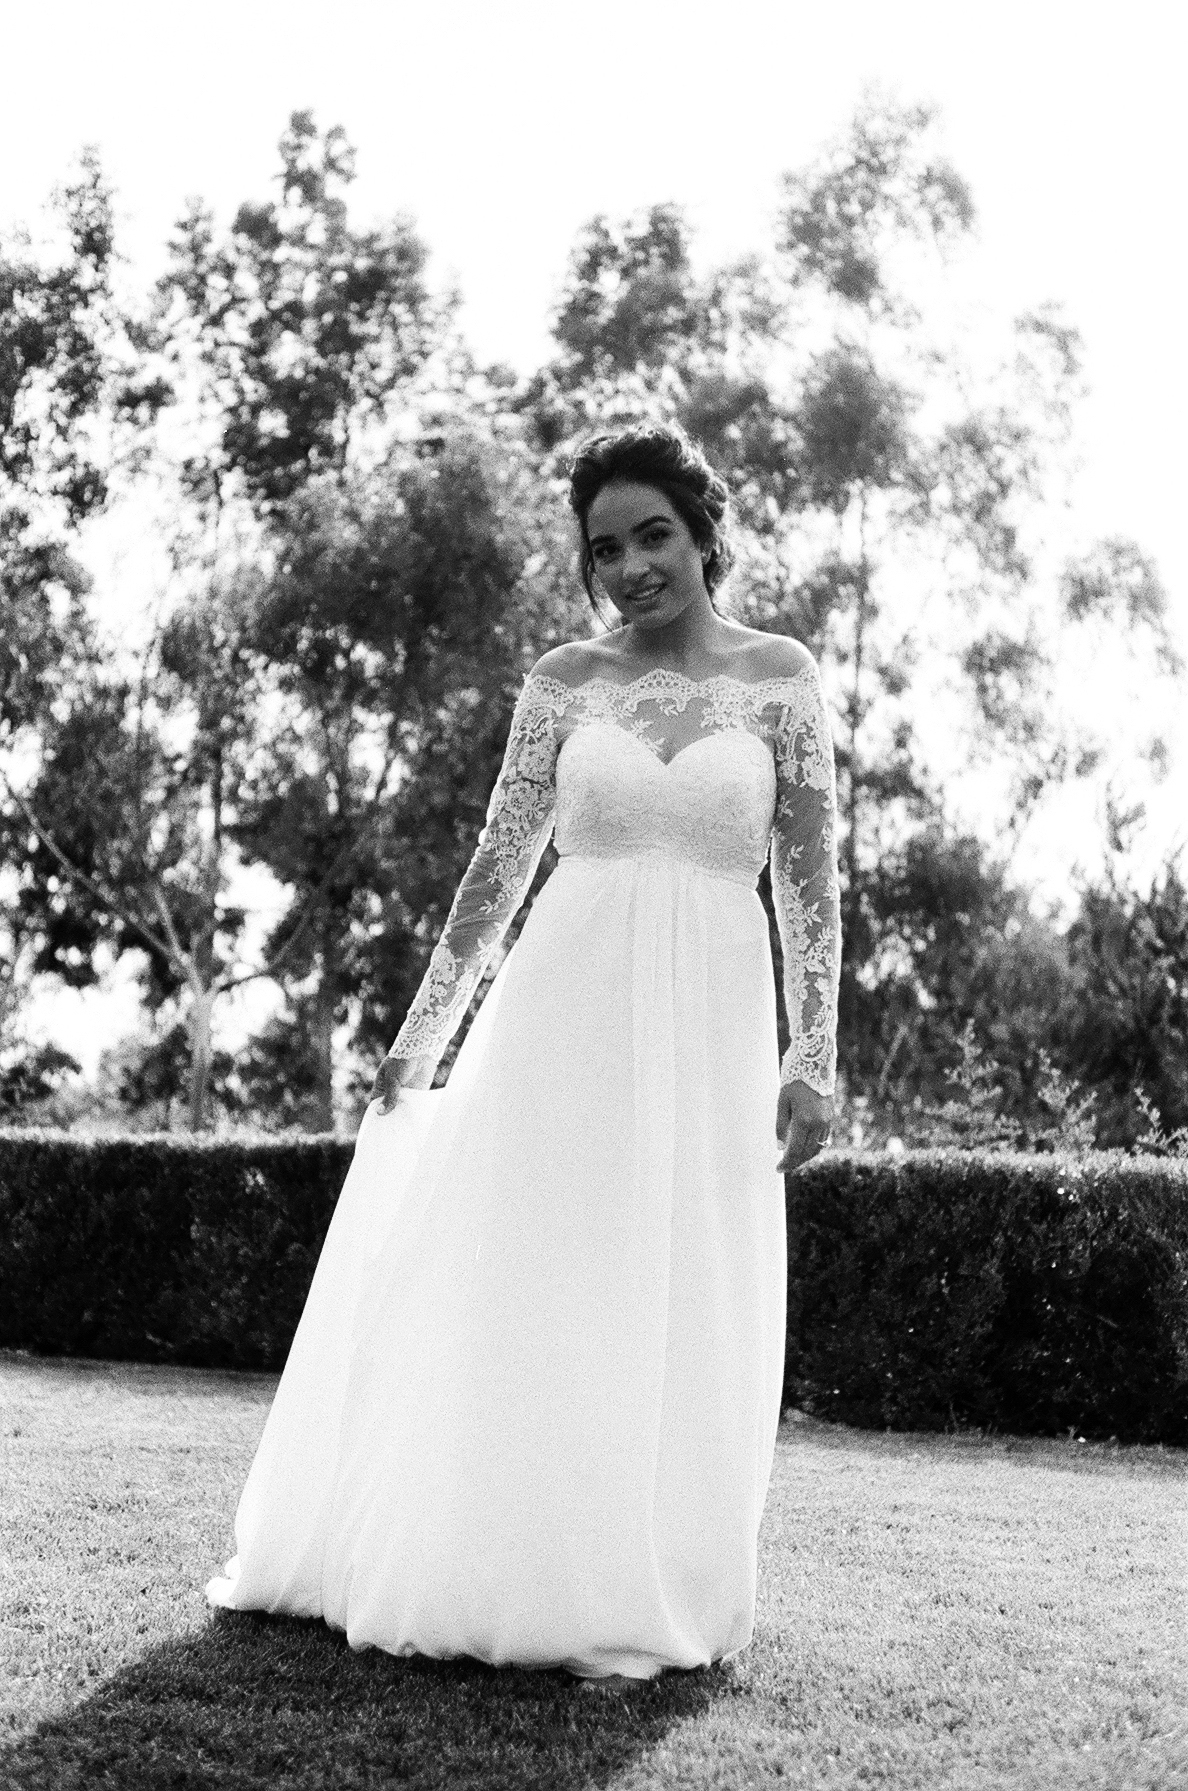  black and white 35mm film photograph of bride Posing in her wedding dress Before the ceremony taken by Joseph Barber wedding photography newport beach